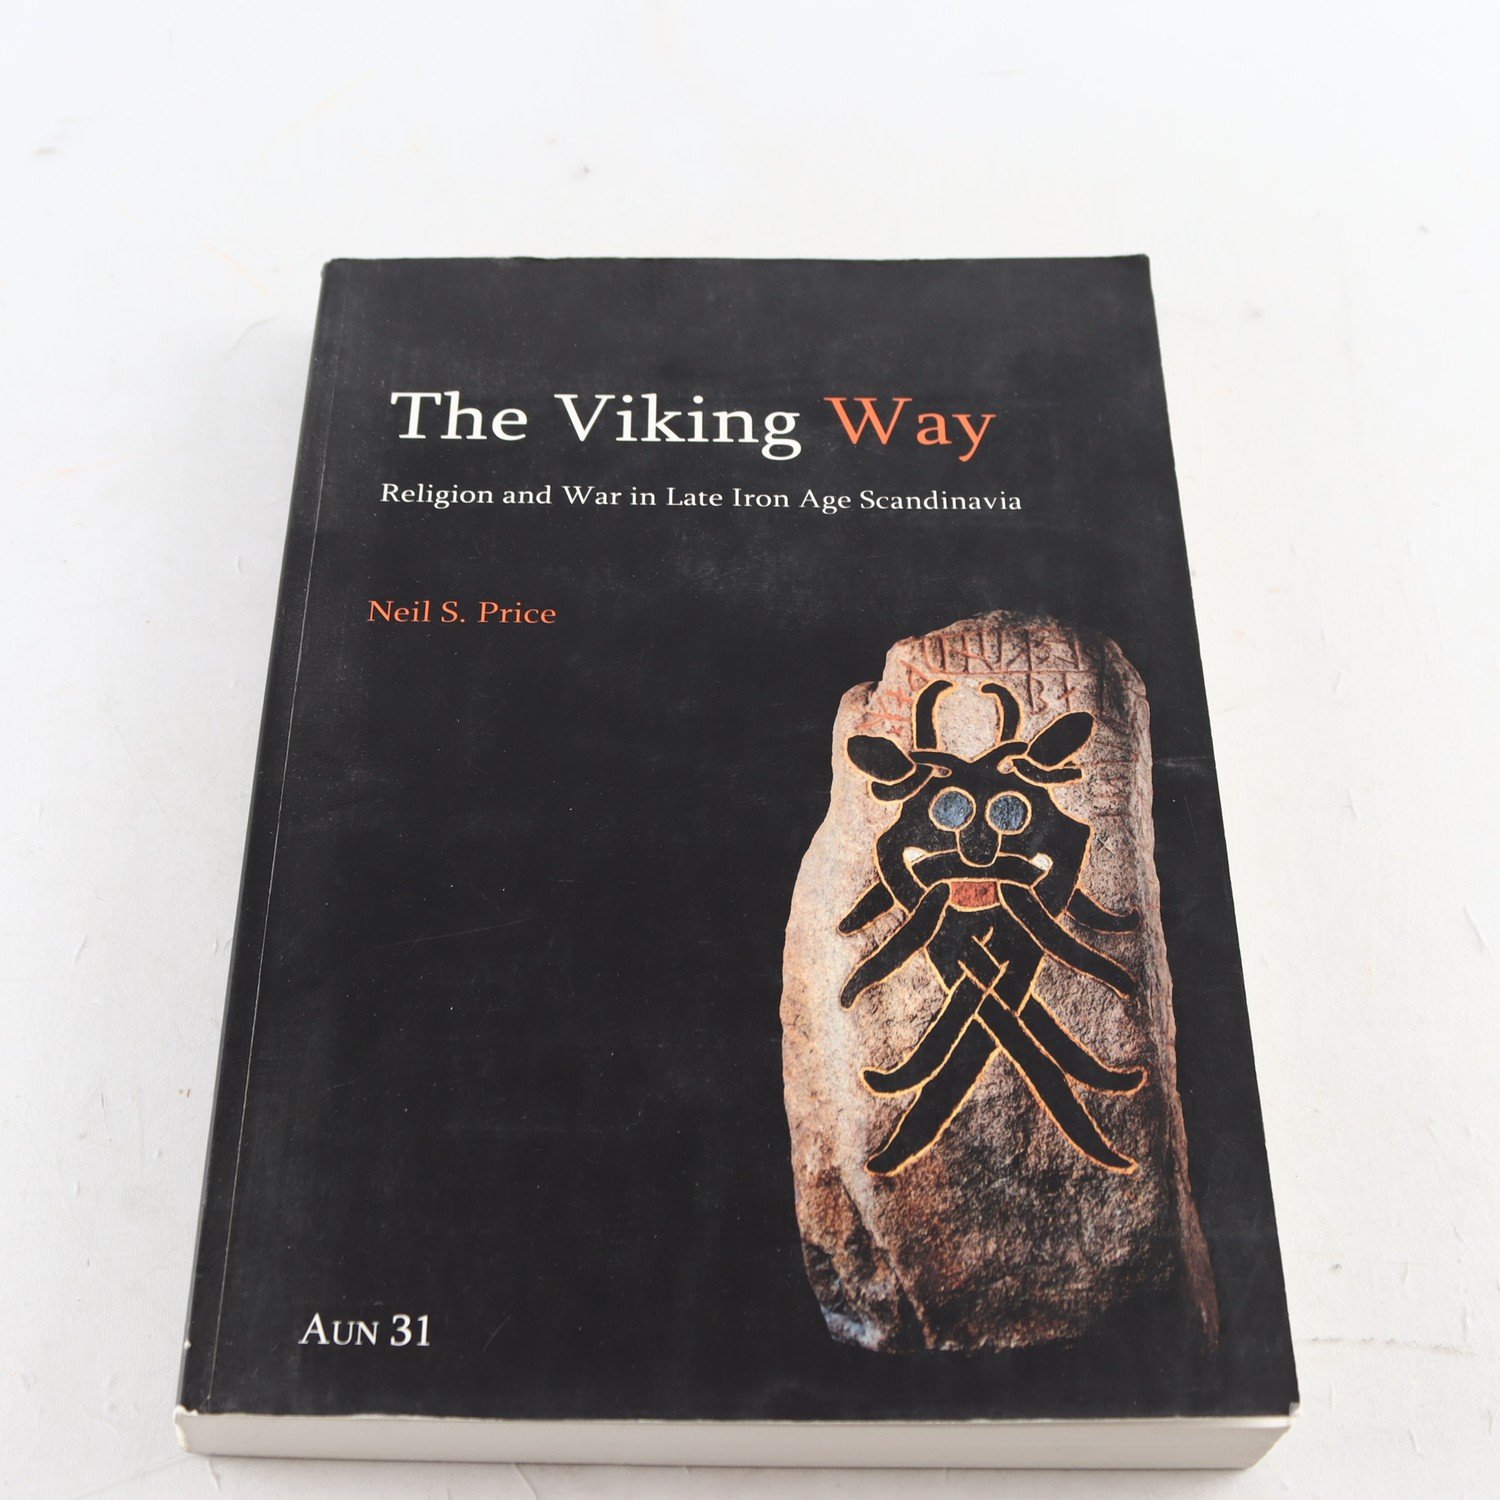 The Viking Way: Religion and War in Late Iron Age Scandinavia